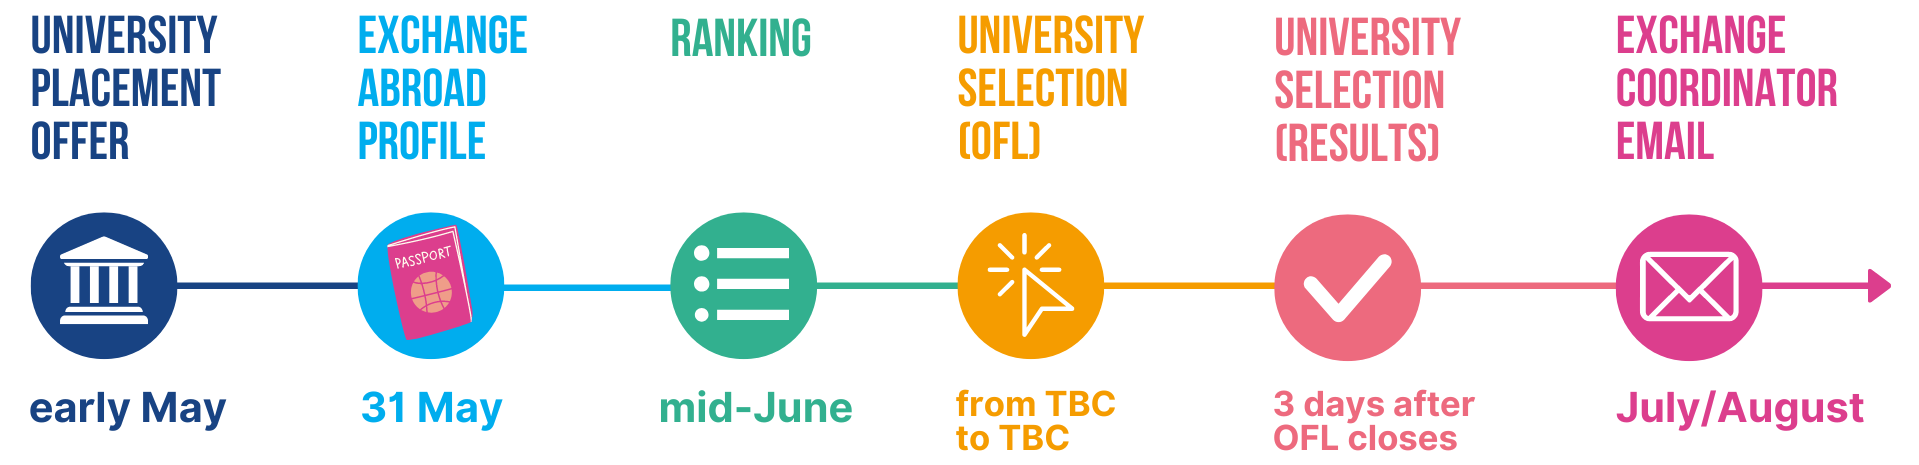 University Selection Timelines (8).png